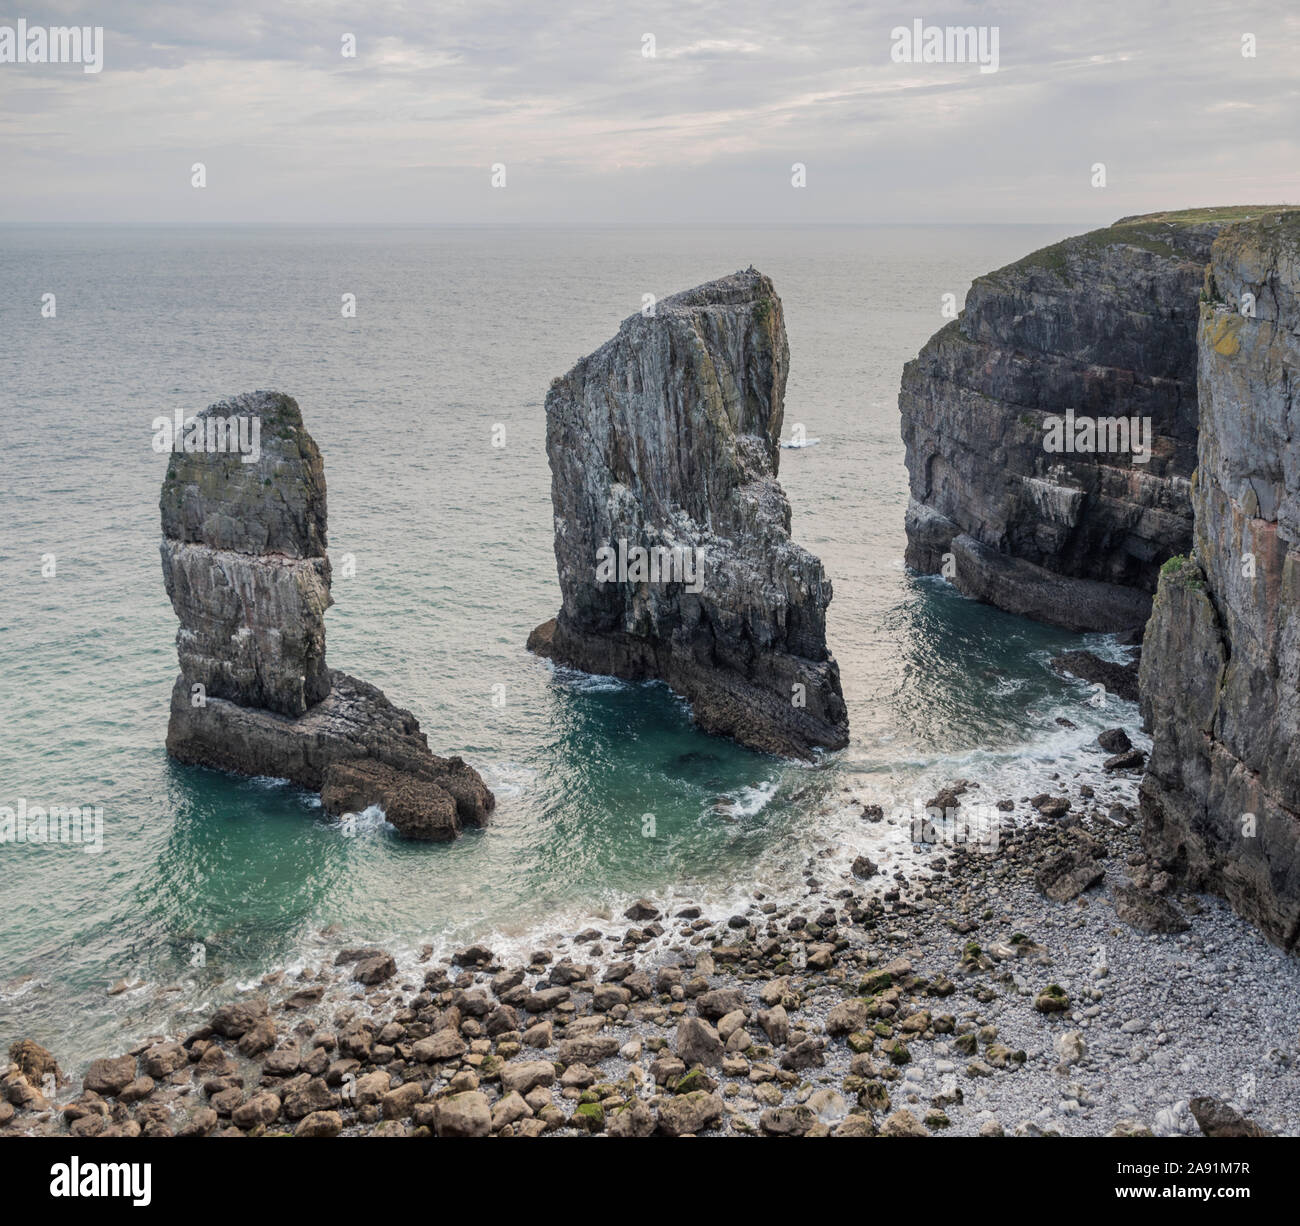 Sea stacks caused by coastal erosion on the shores of Pembrokeshire, Wales. Stock Photo